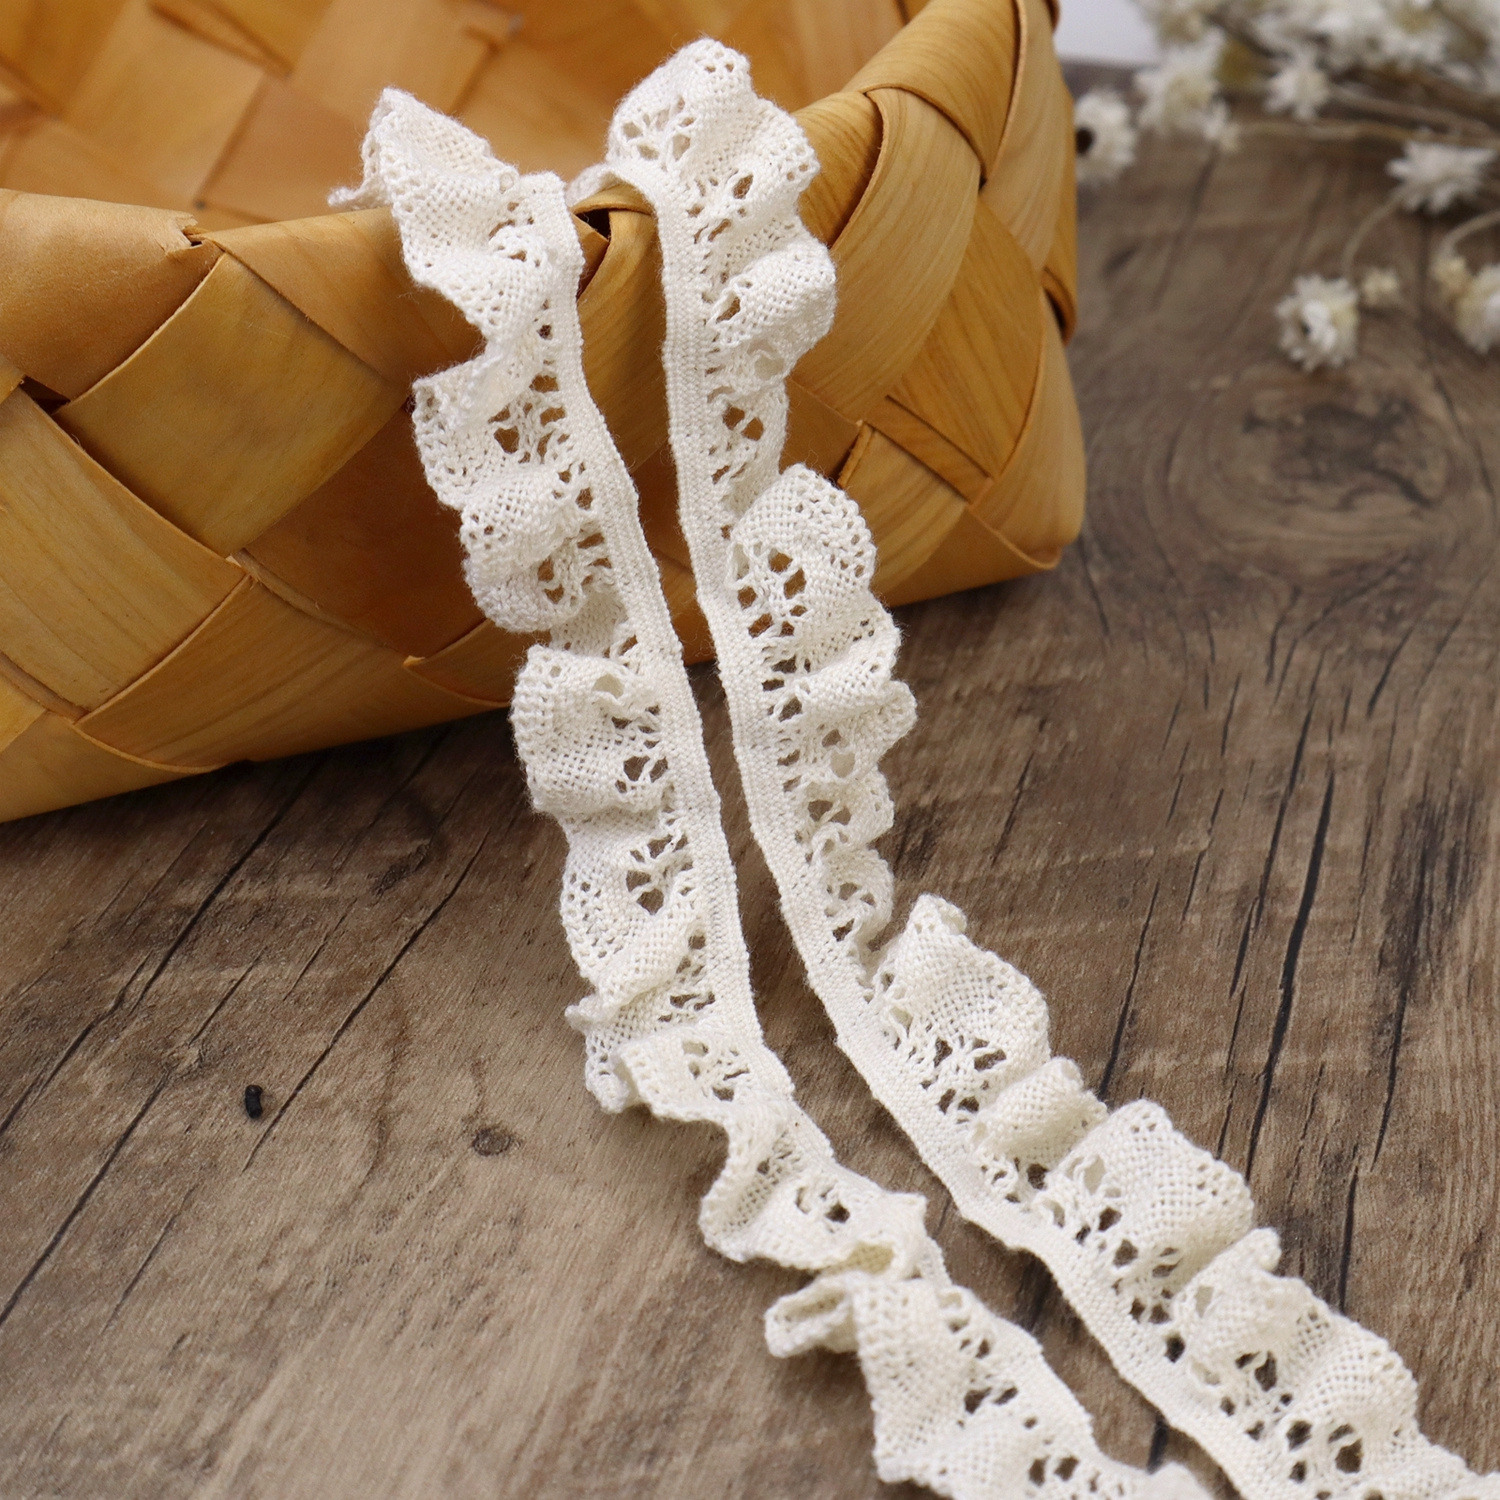 Stretch Lace Trim Elastic-Frilly Trim for Socks-Delicate Lace Ribbon for  Craft-Gathered Crocheted Lace Trim DIY Craft Ribbon (5Yards Vintage Elastic